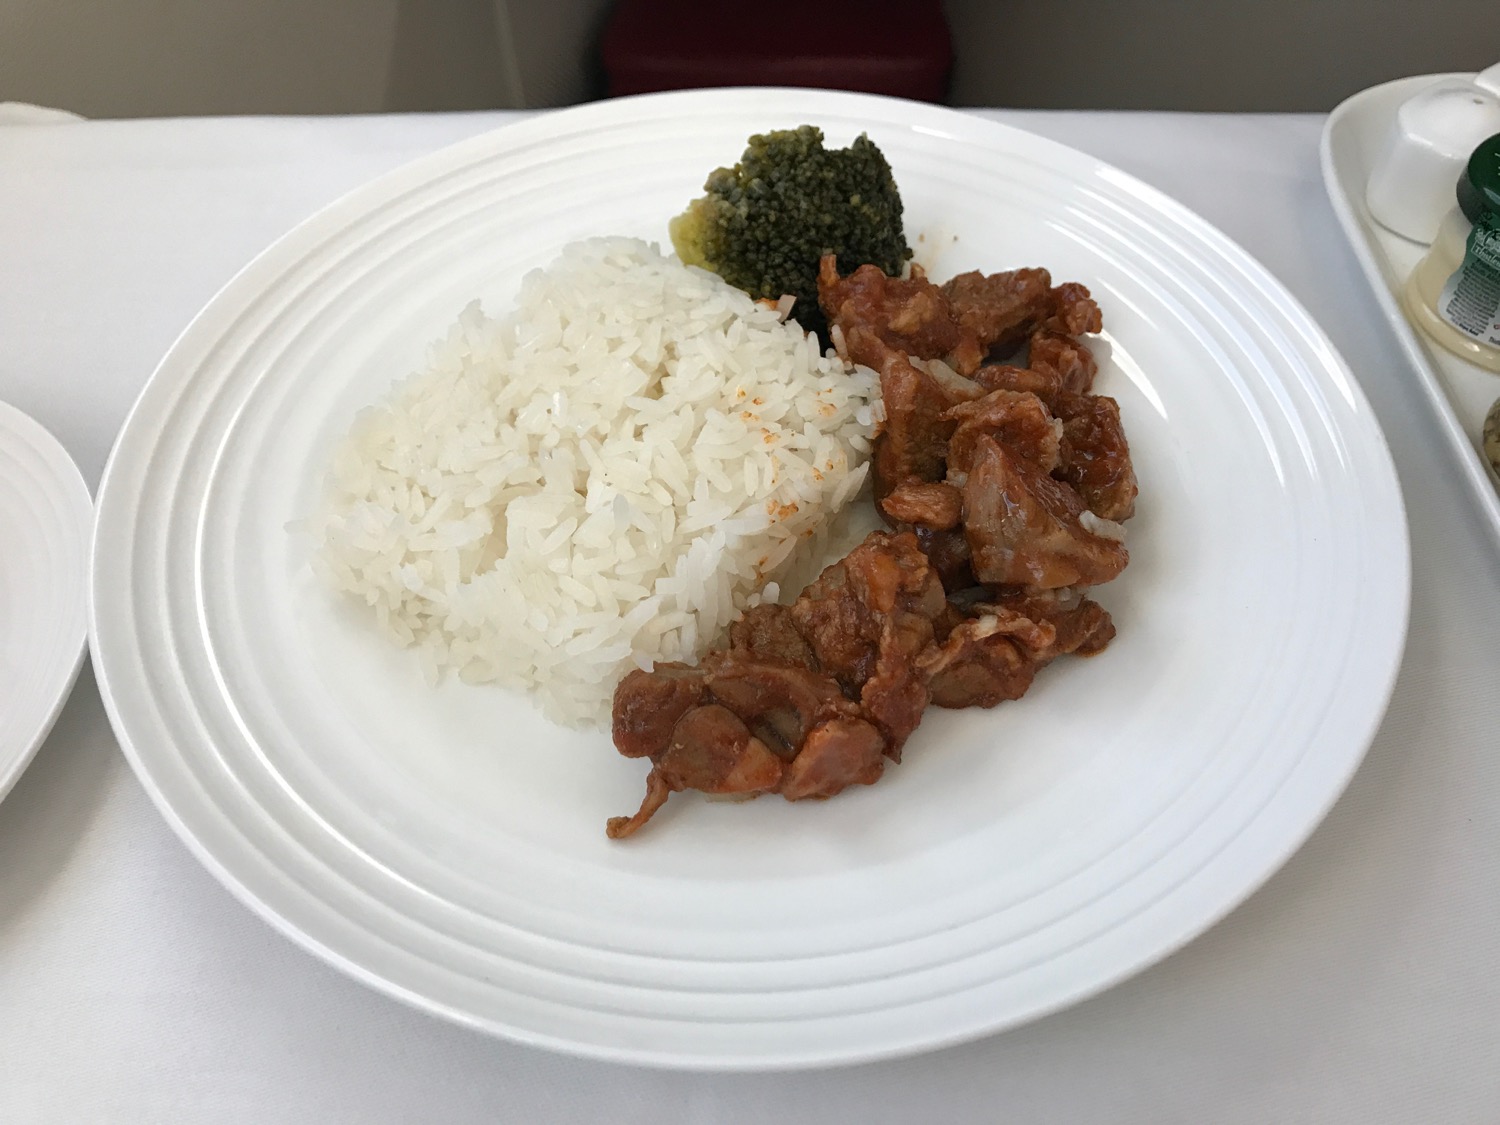 a plate of rice and meat